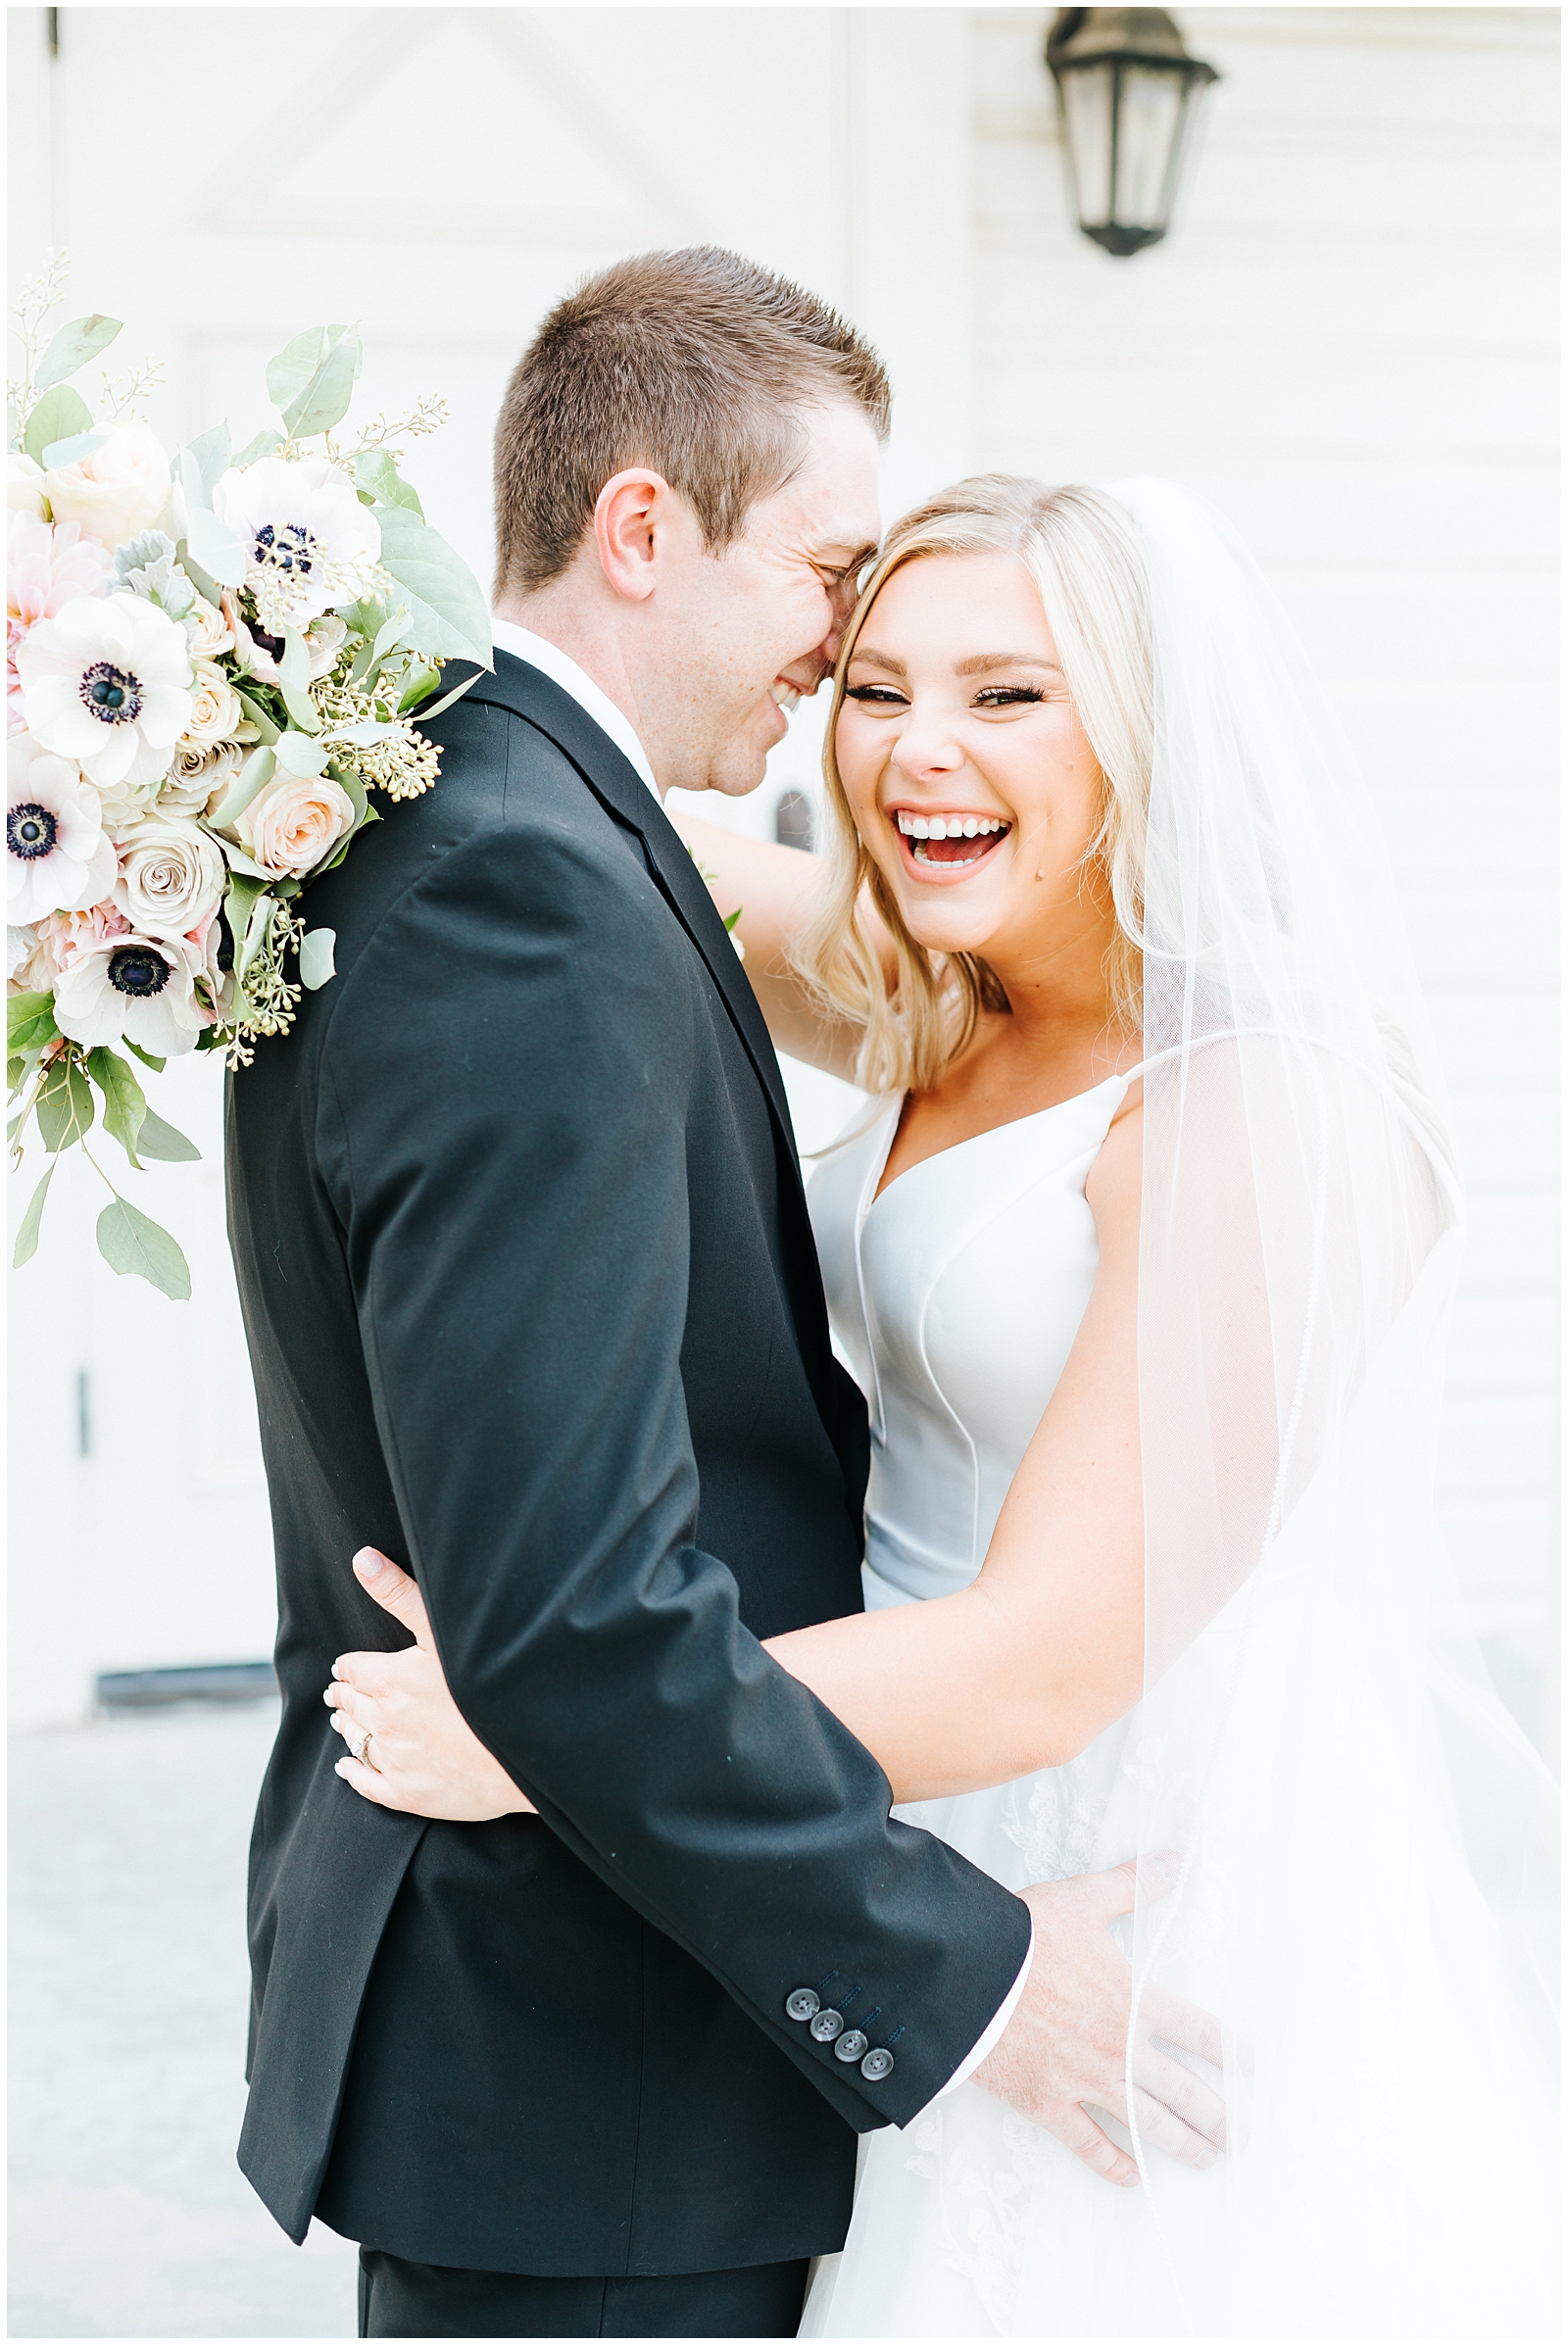 Giggly Bride and Groom Portraits at August Still Water Hollow Wedding 